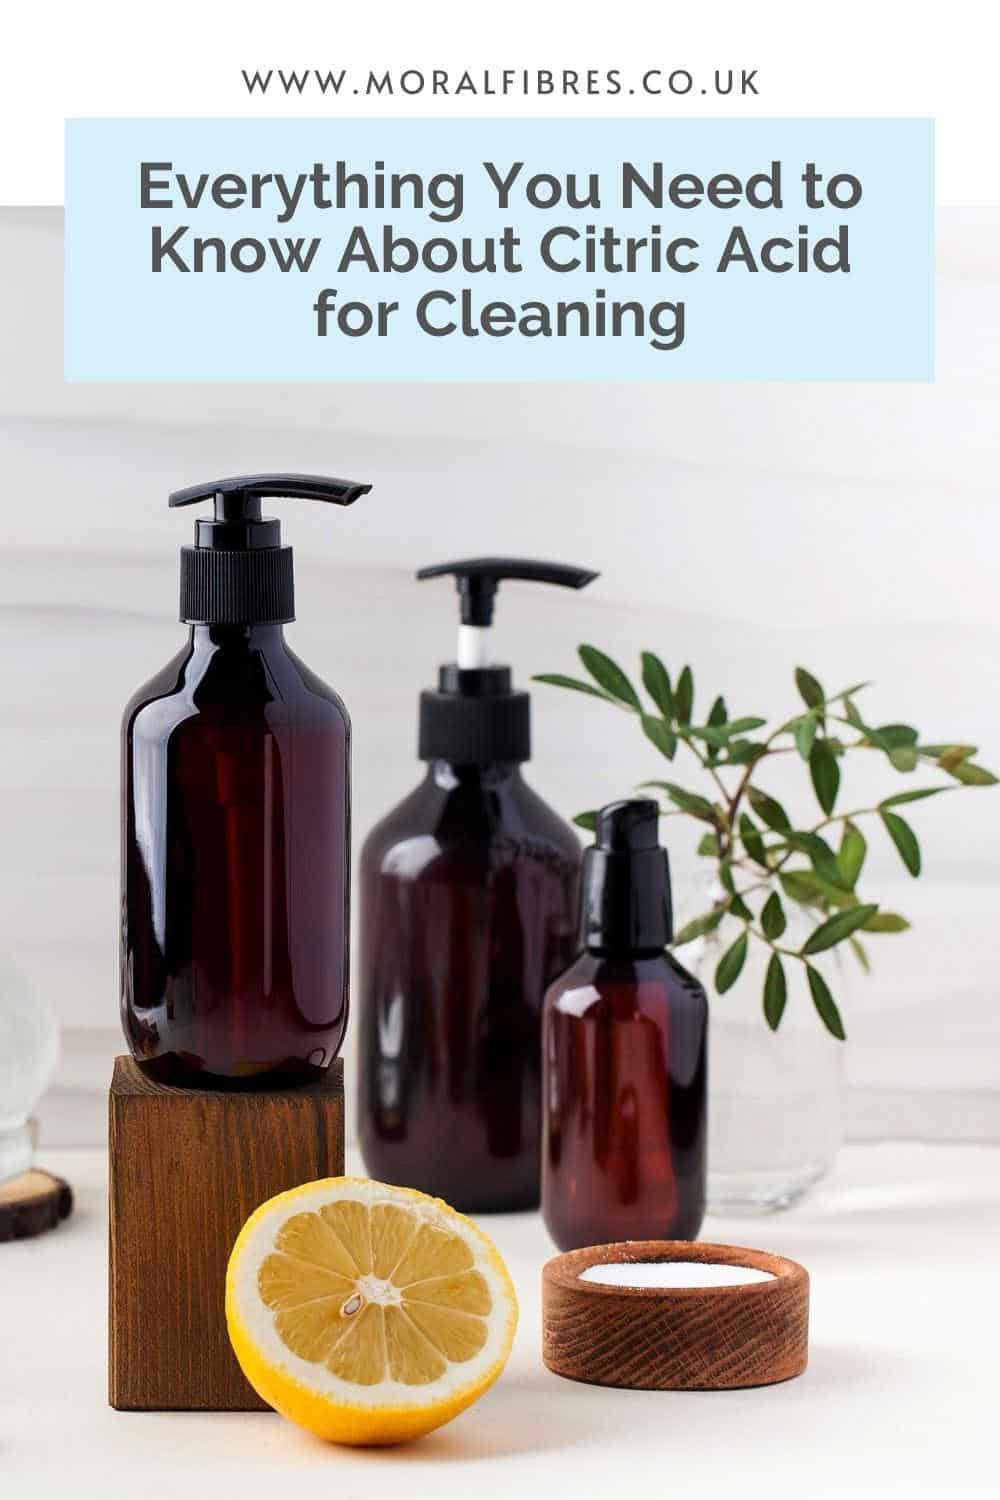 4 Reasons to Choose Citric Acid Limescale Remover - Terra Gaia